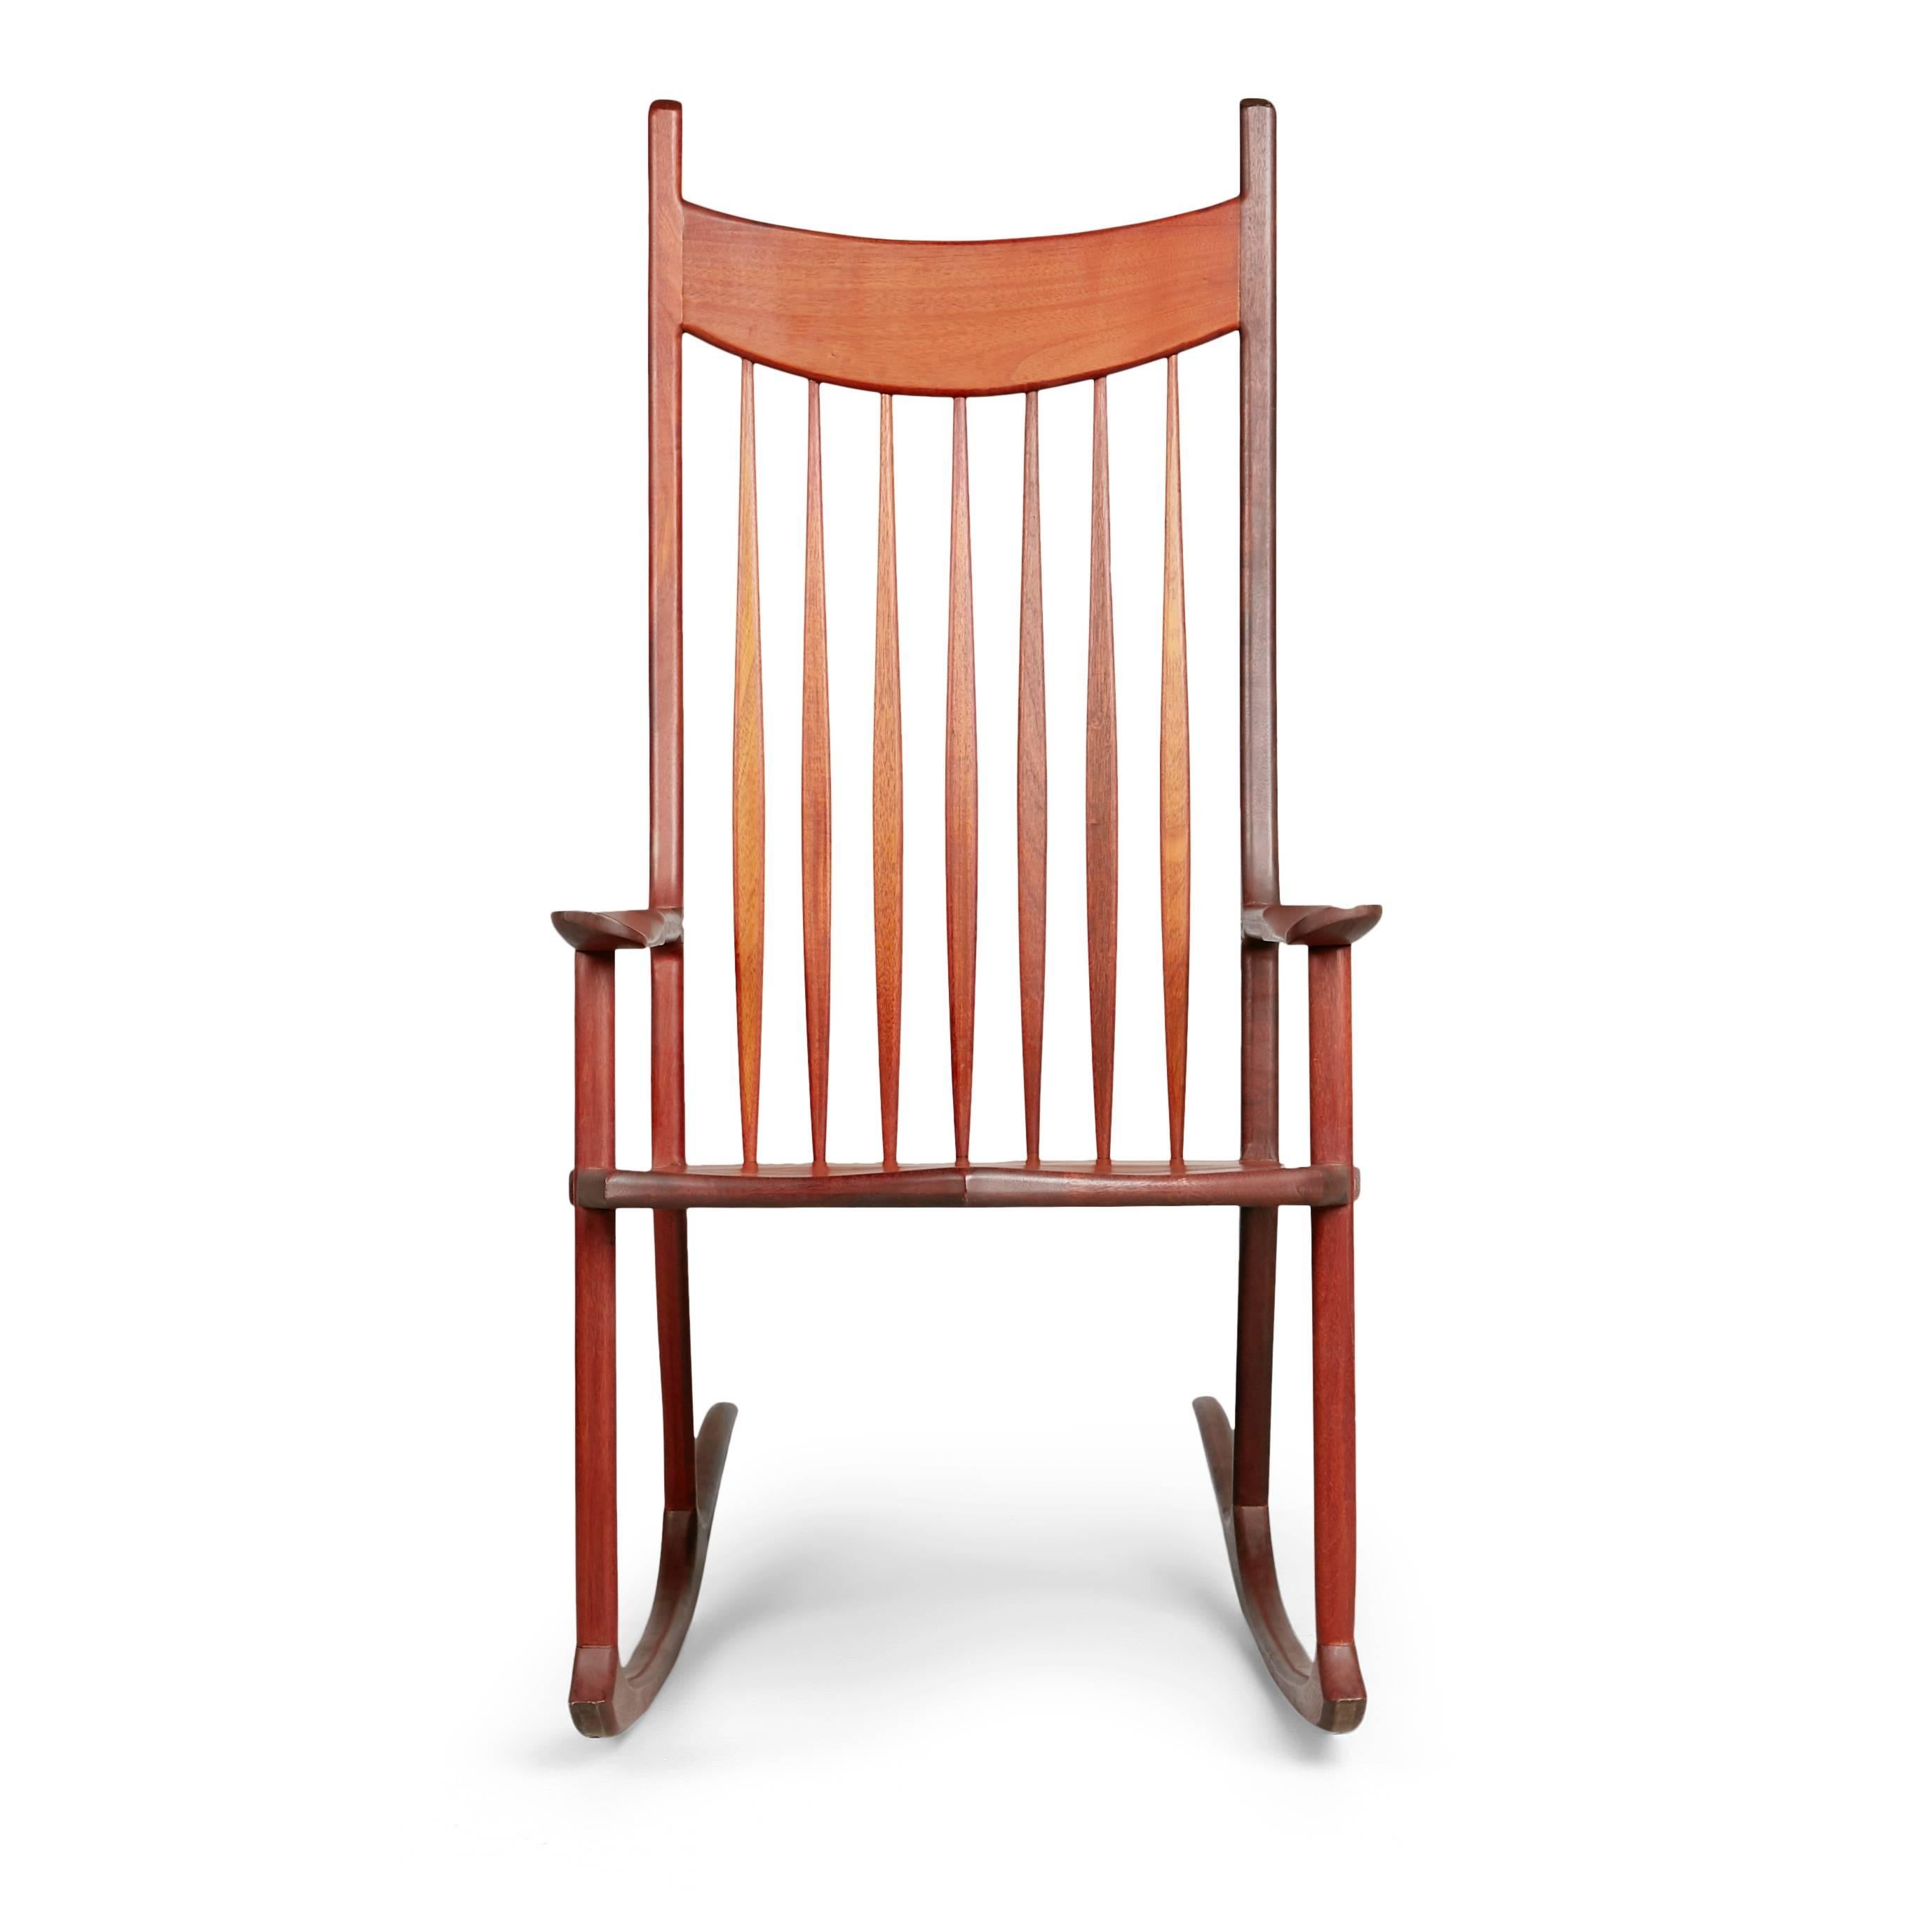 Oversized Sam Maloof styled American craftsman rocking chair. This generously proportioned armchair consists of a tall spindled back with a broad seat and armrests which have brass dowel accents. The runners of this rocker curve gracefully and